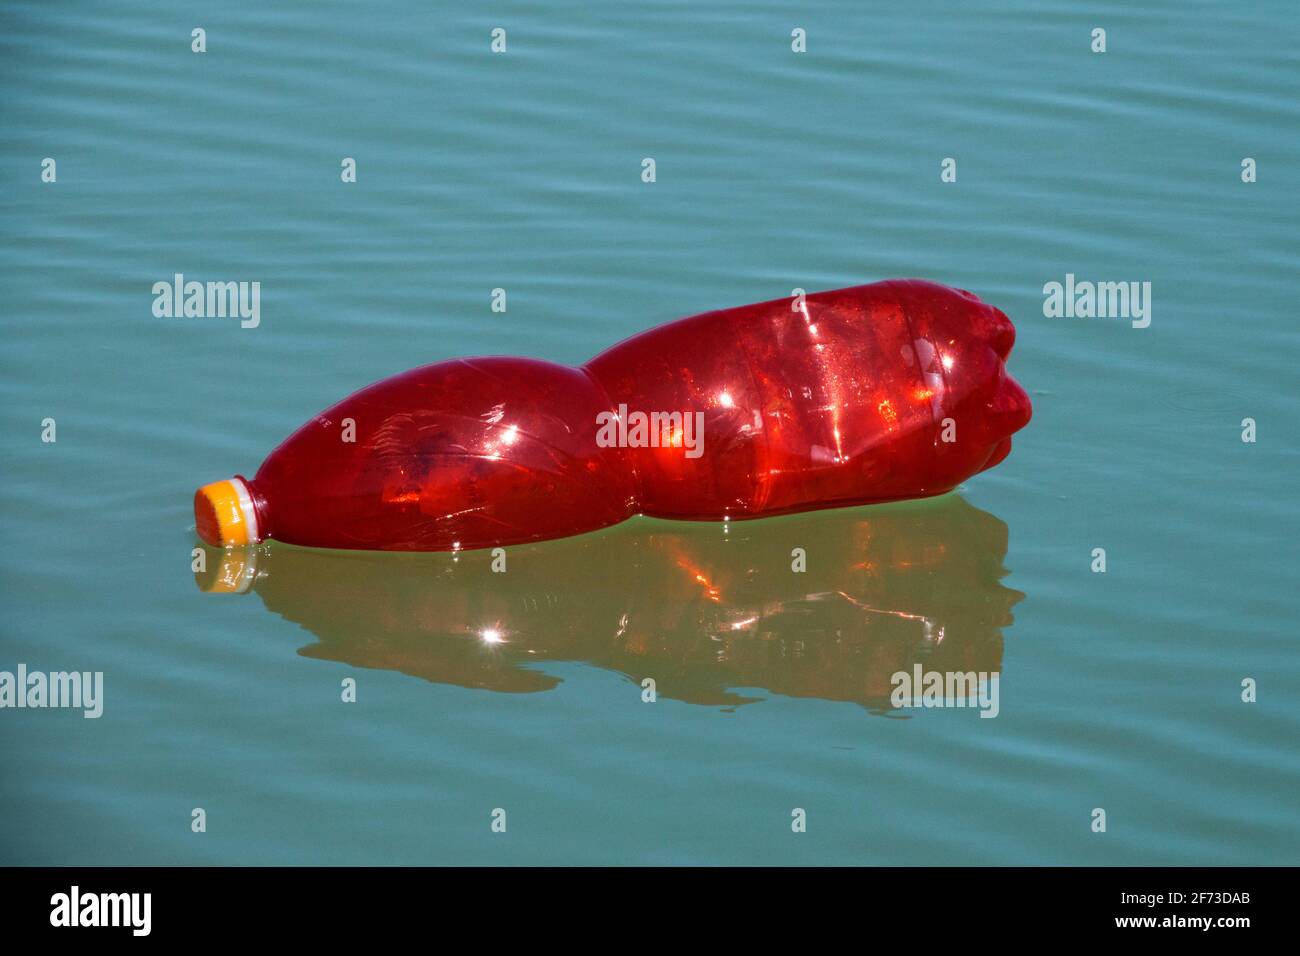 Red plastic bottle floating on the surface water Stock Photo